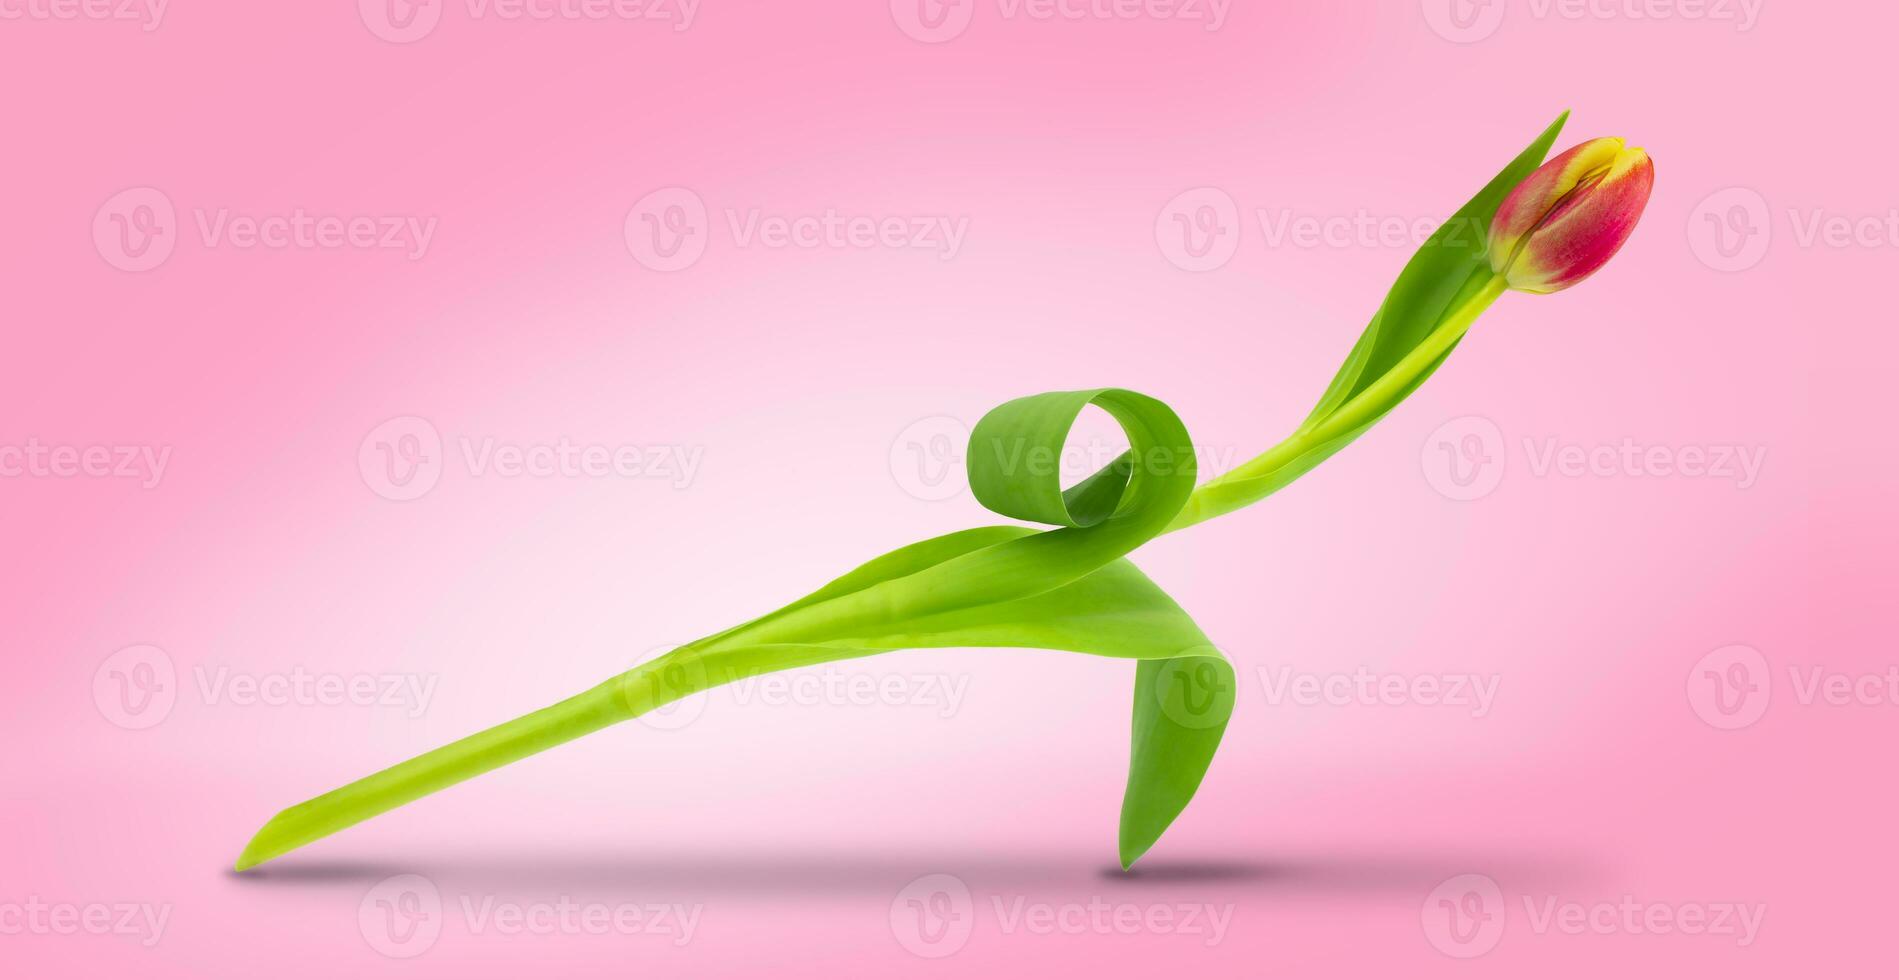 Levitating red tulip on a pink background. Minimalist flower composition. photo